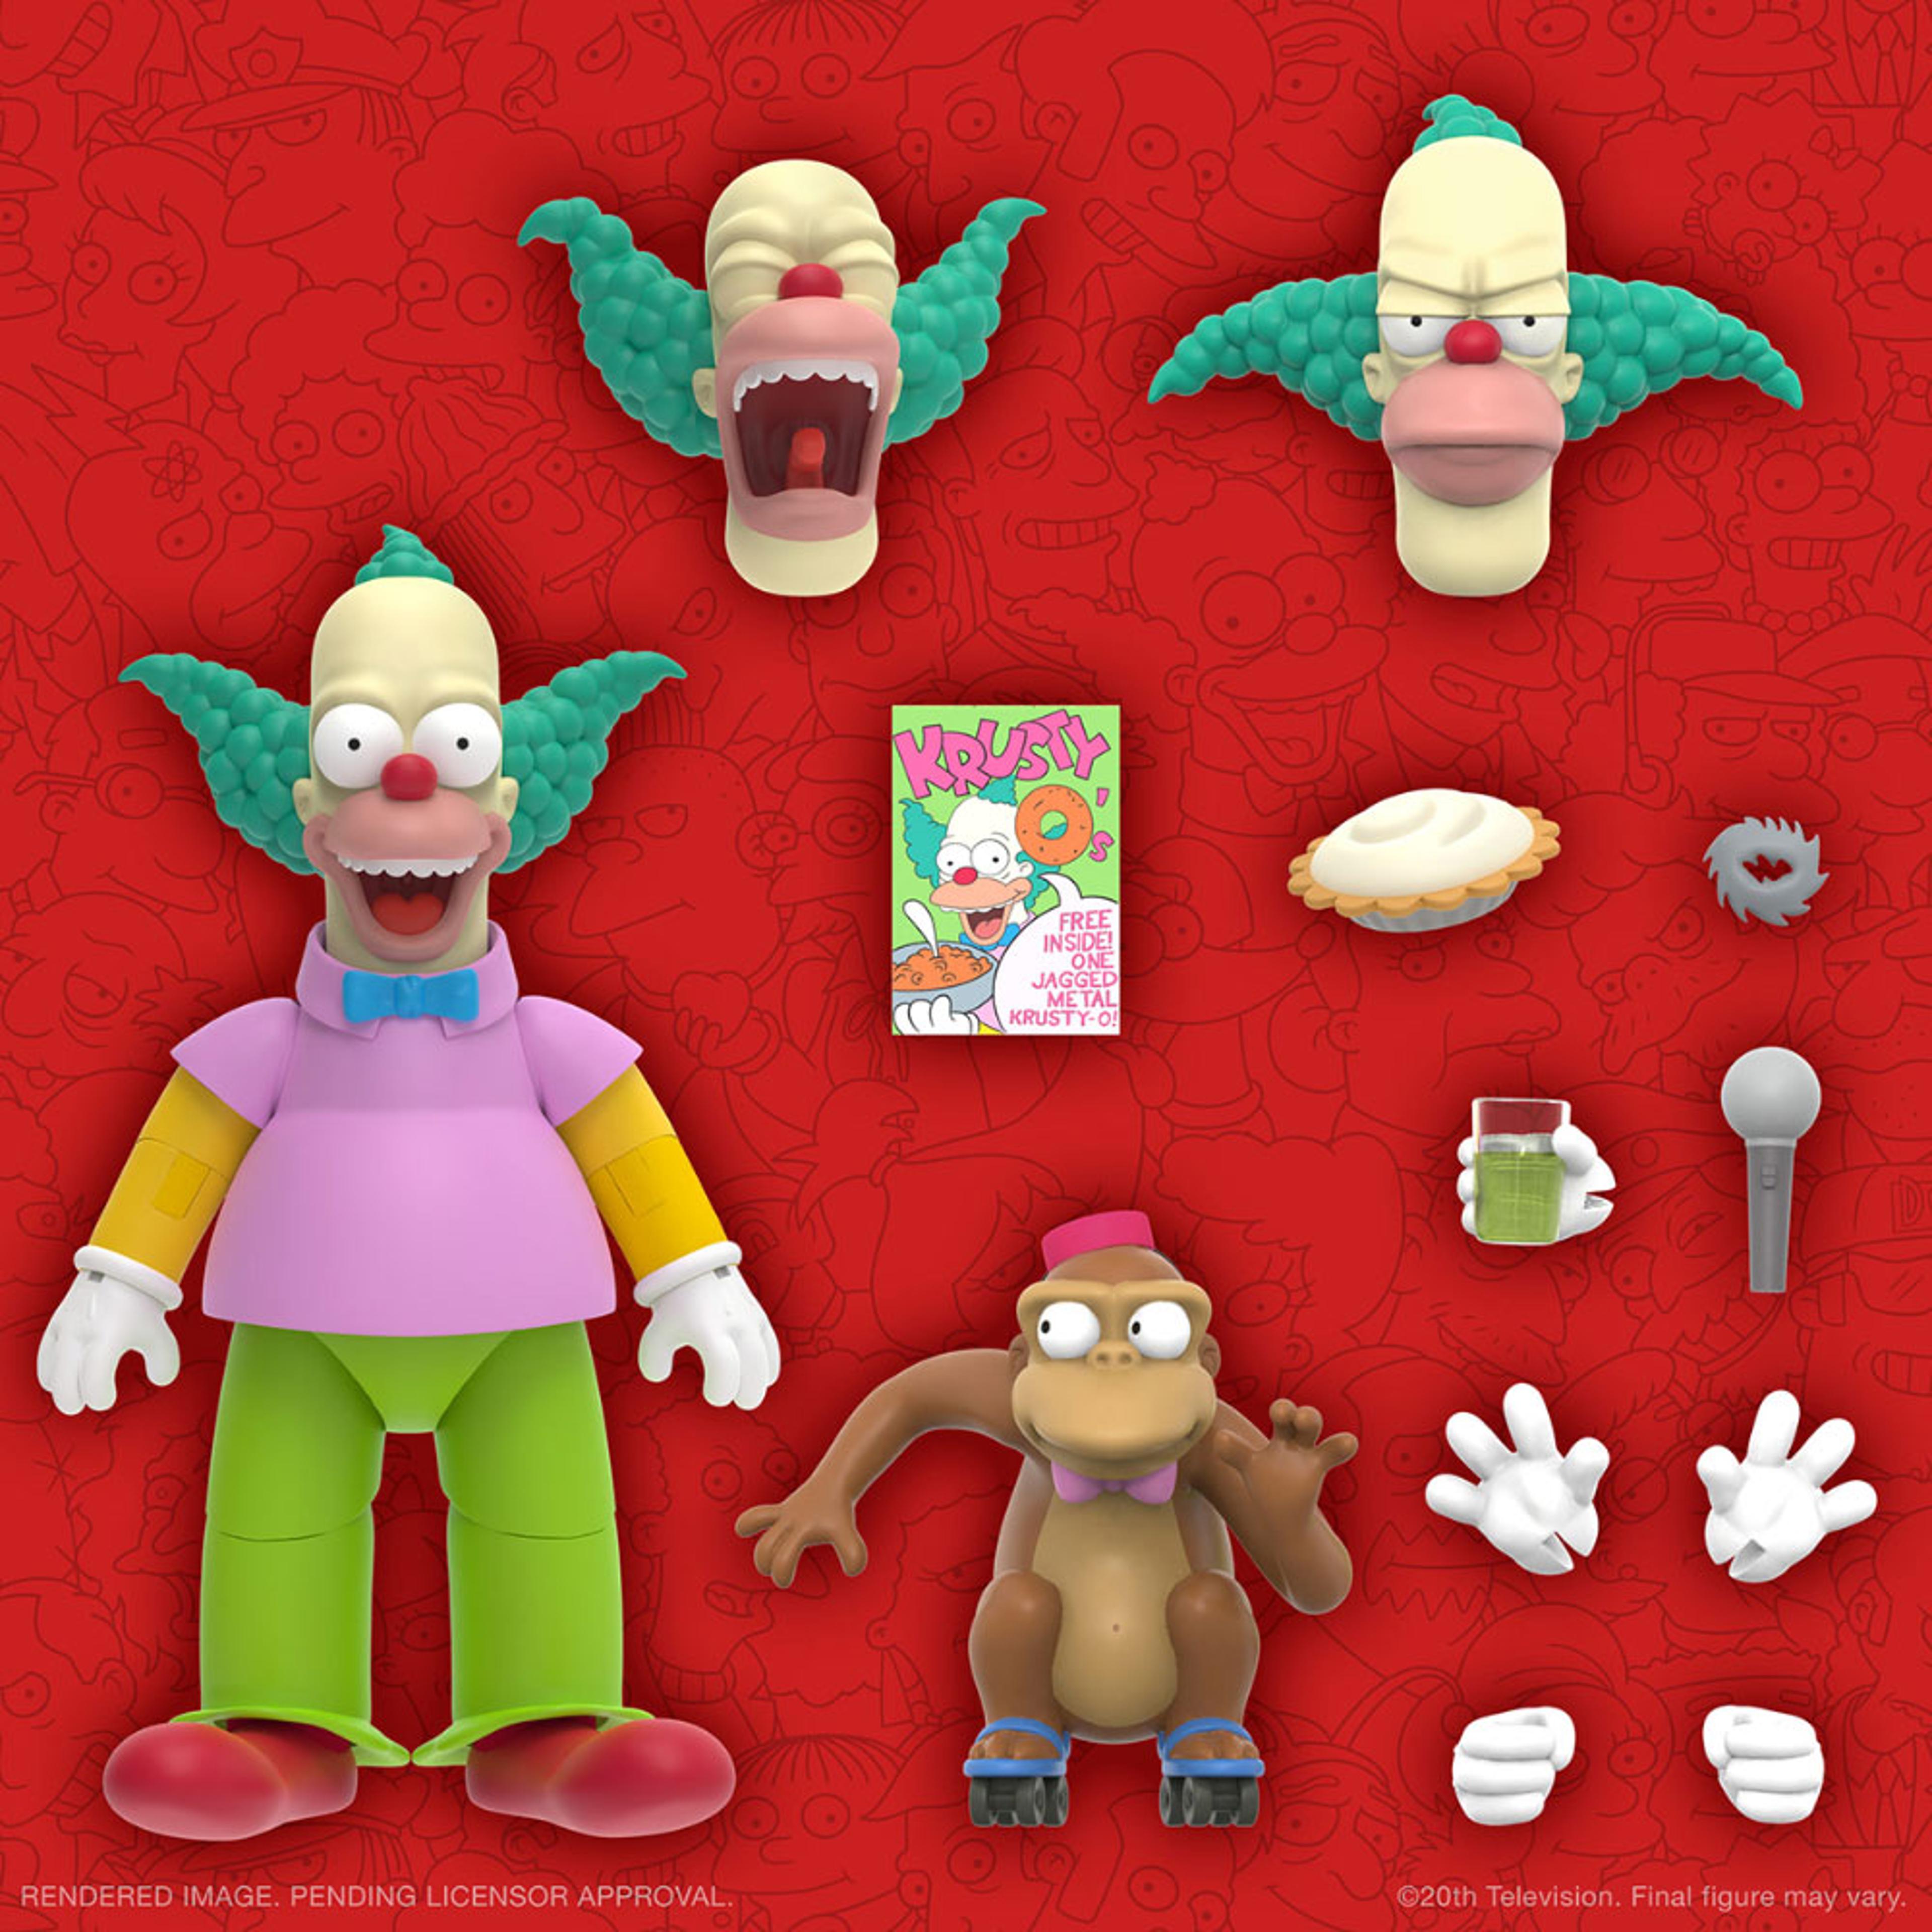 Alternate View 1 of The Simpsons Ultimates Wave 2 Krusty The Clown Action Figure by 